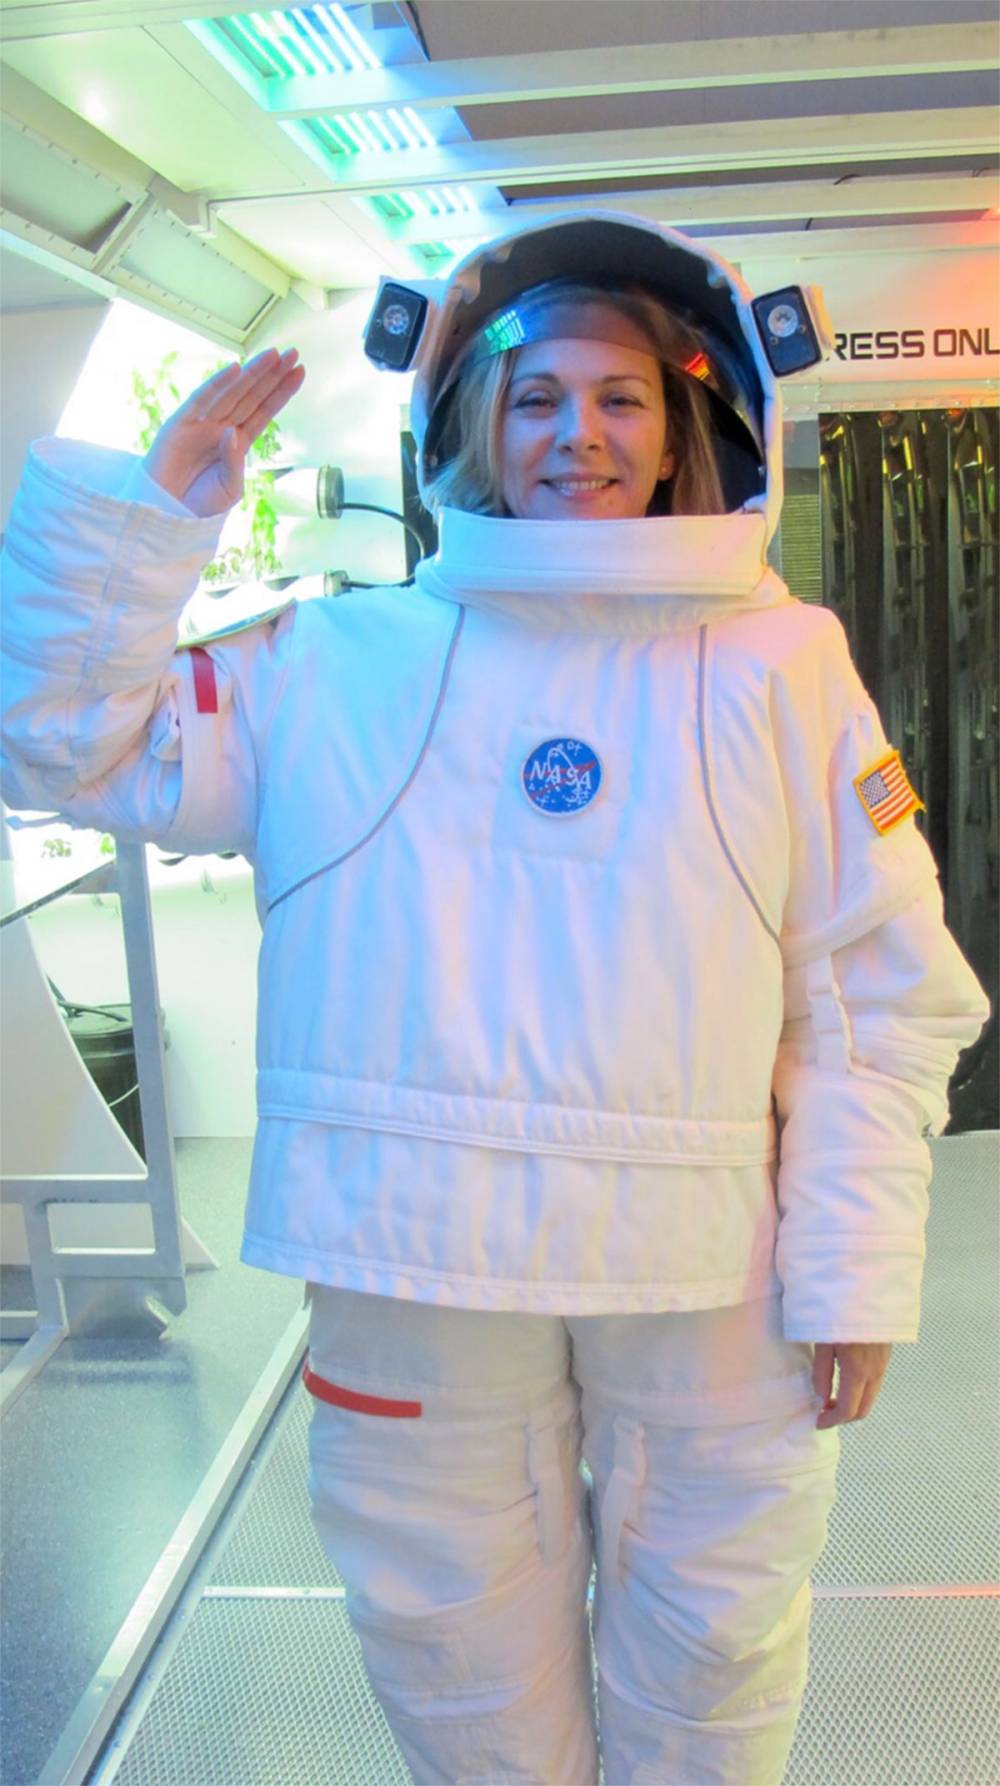 Kim Cattrall Trolls Fans With Space Photo 2